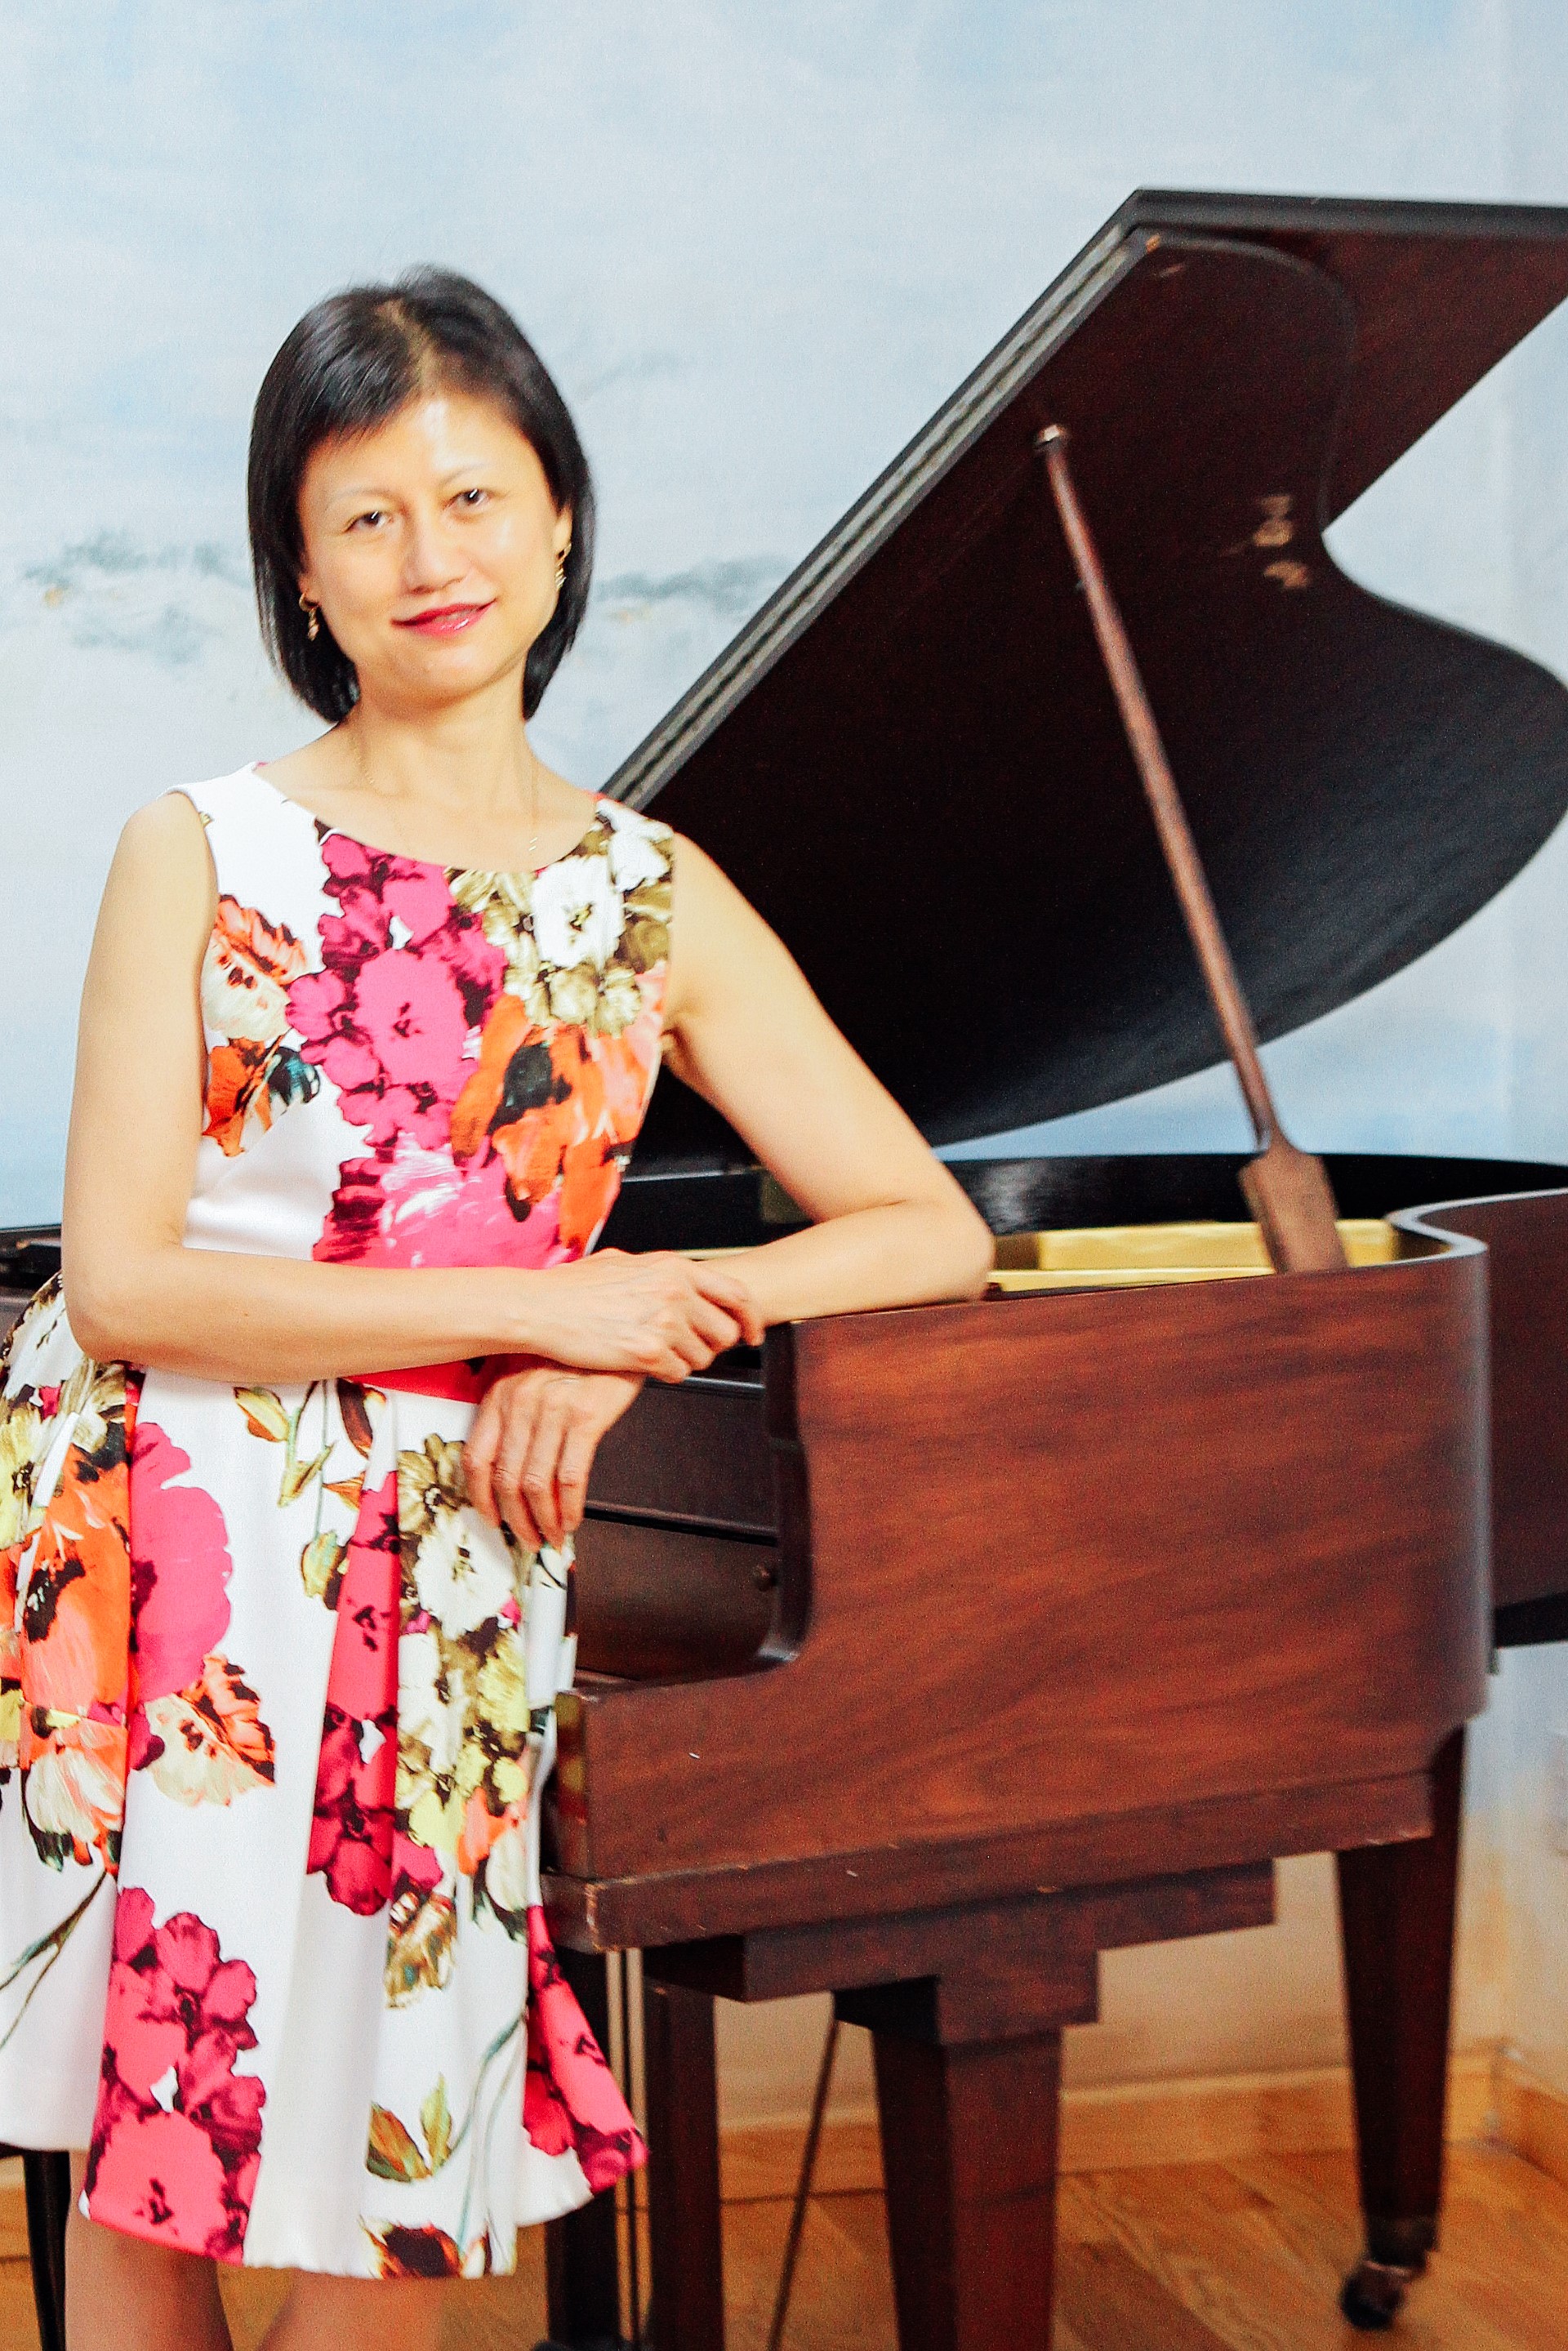 Woman leaning against piano with a floral dress and gray background.